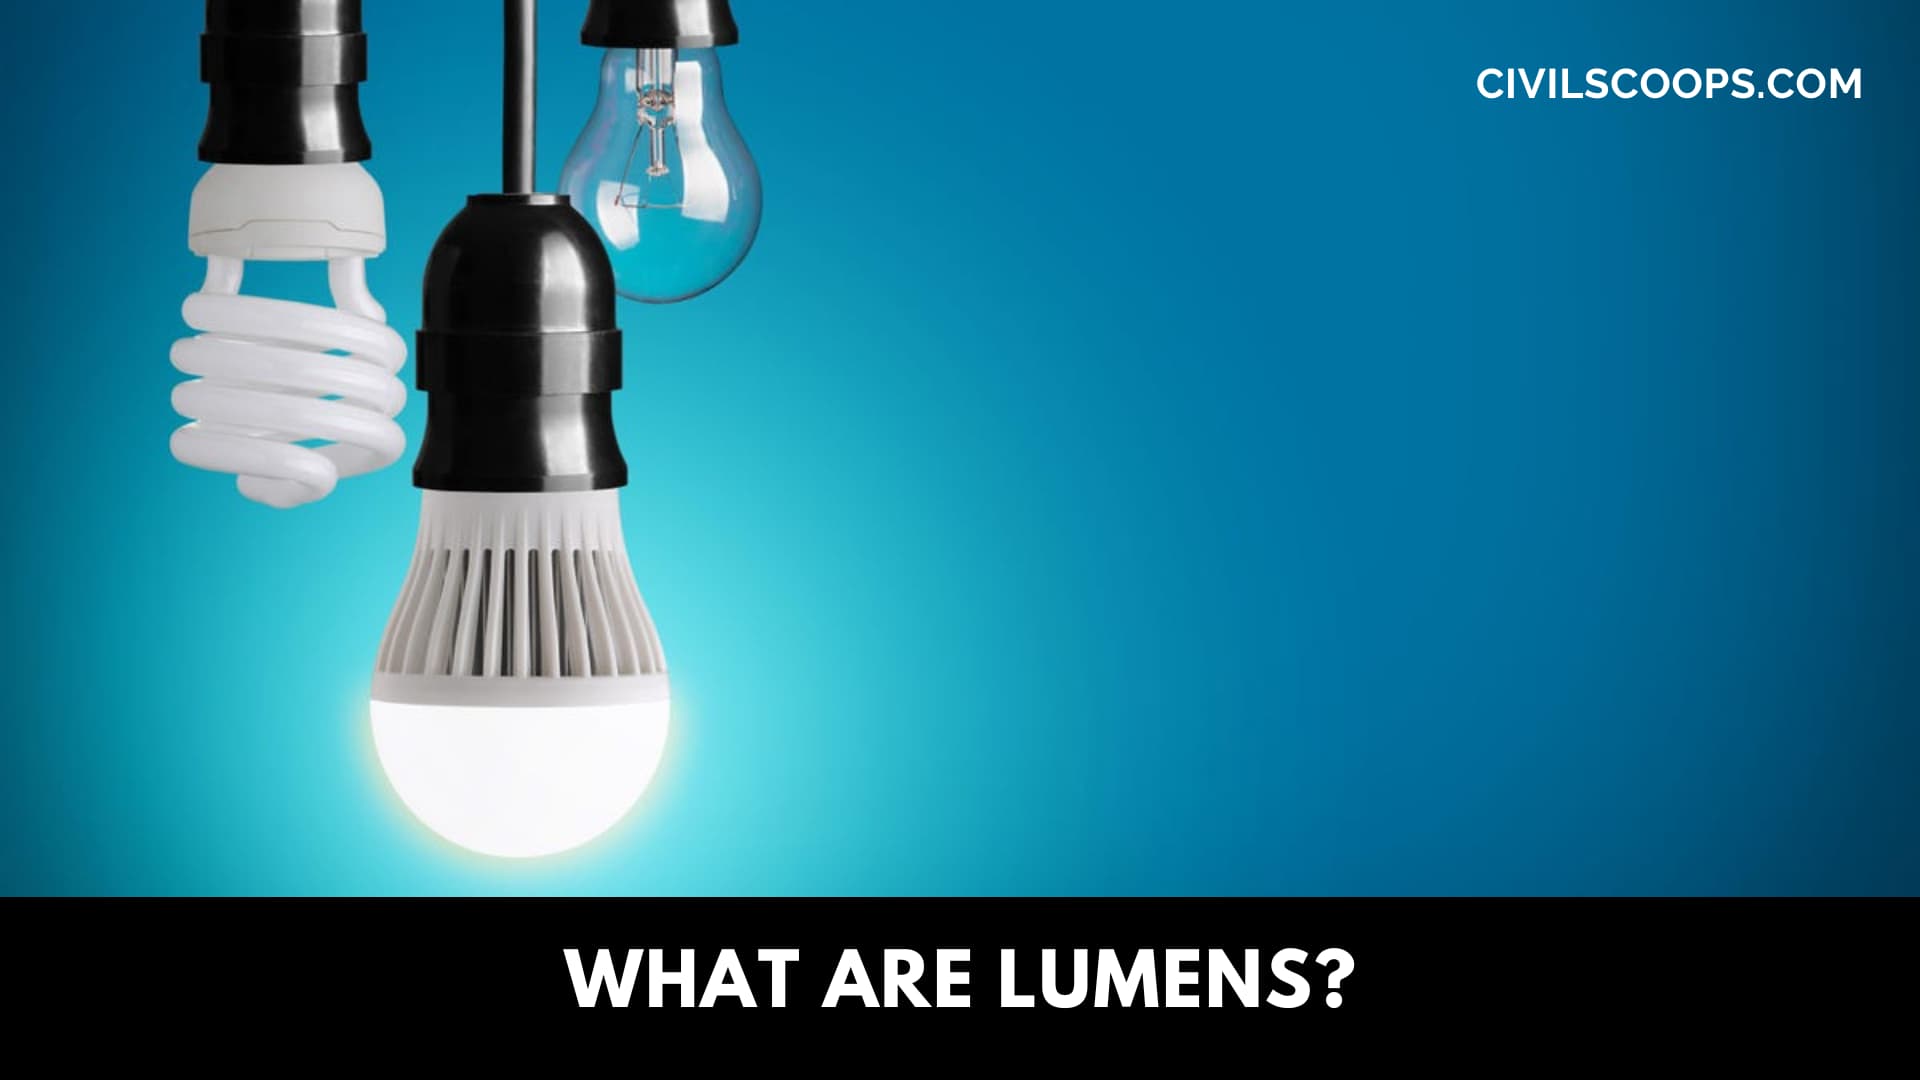 What Are Lumens?